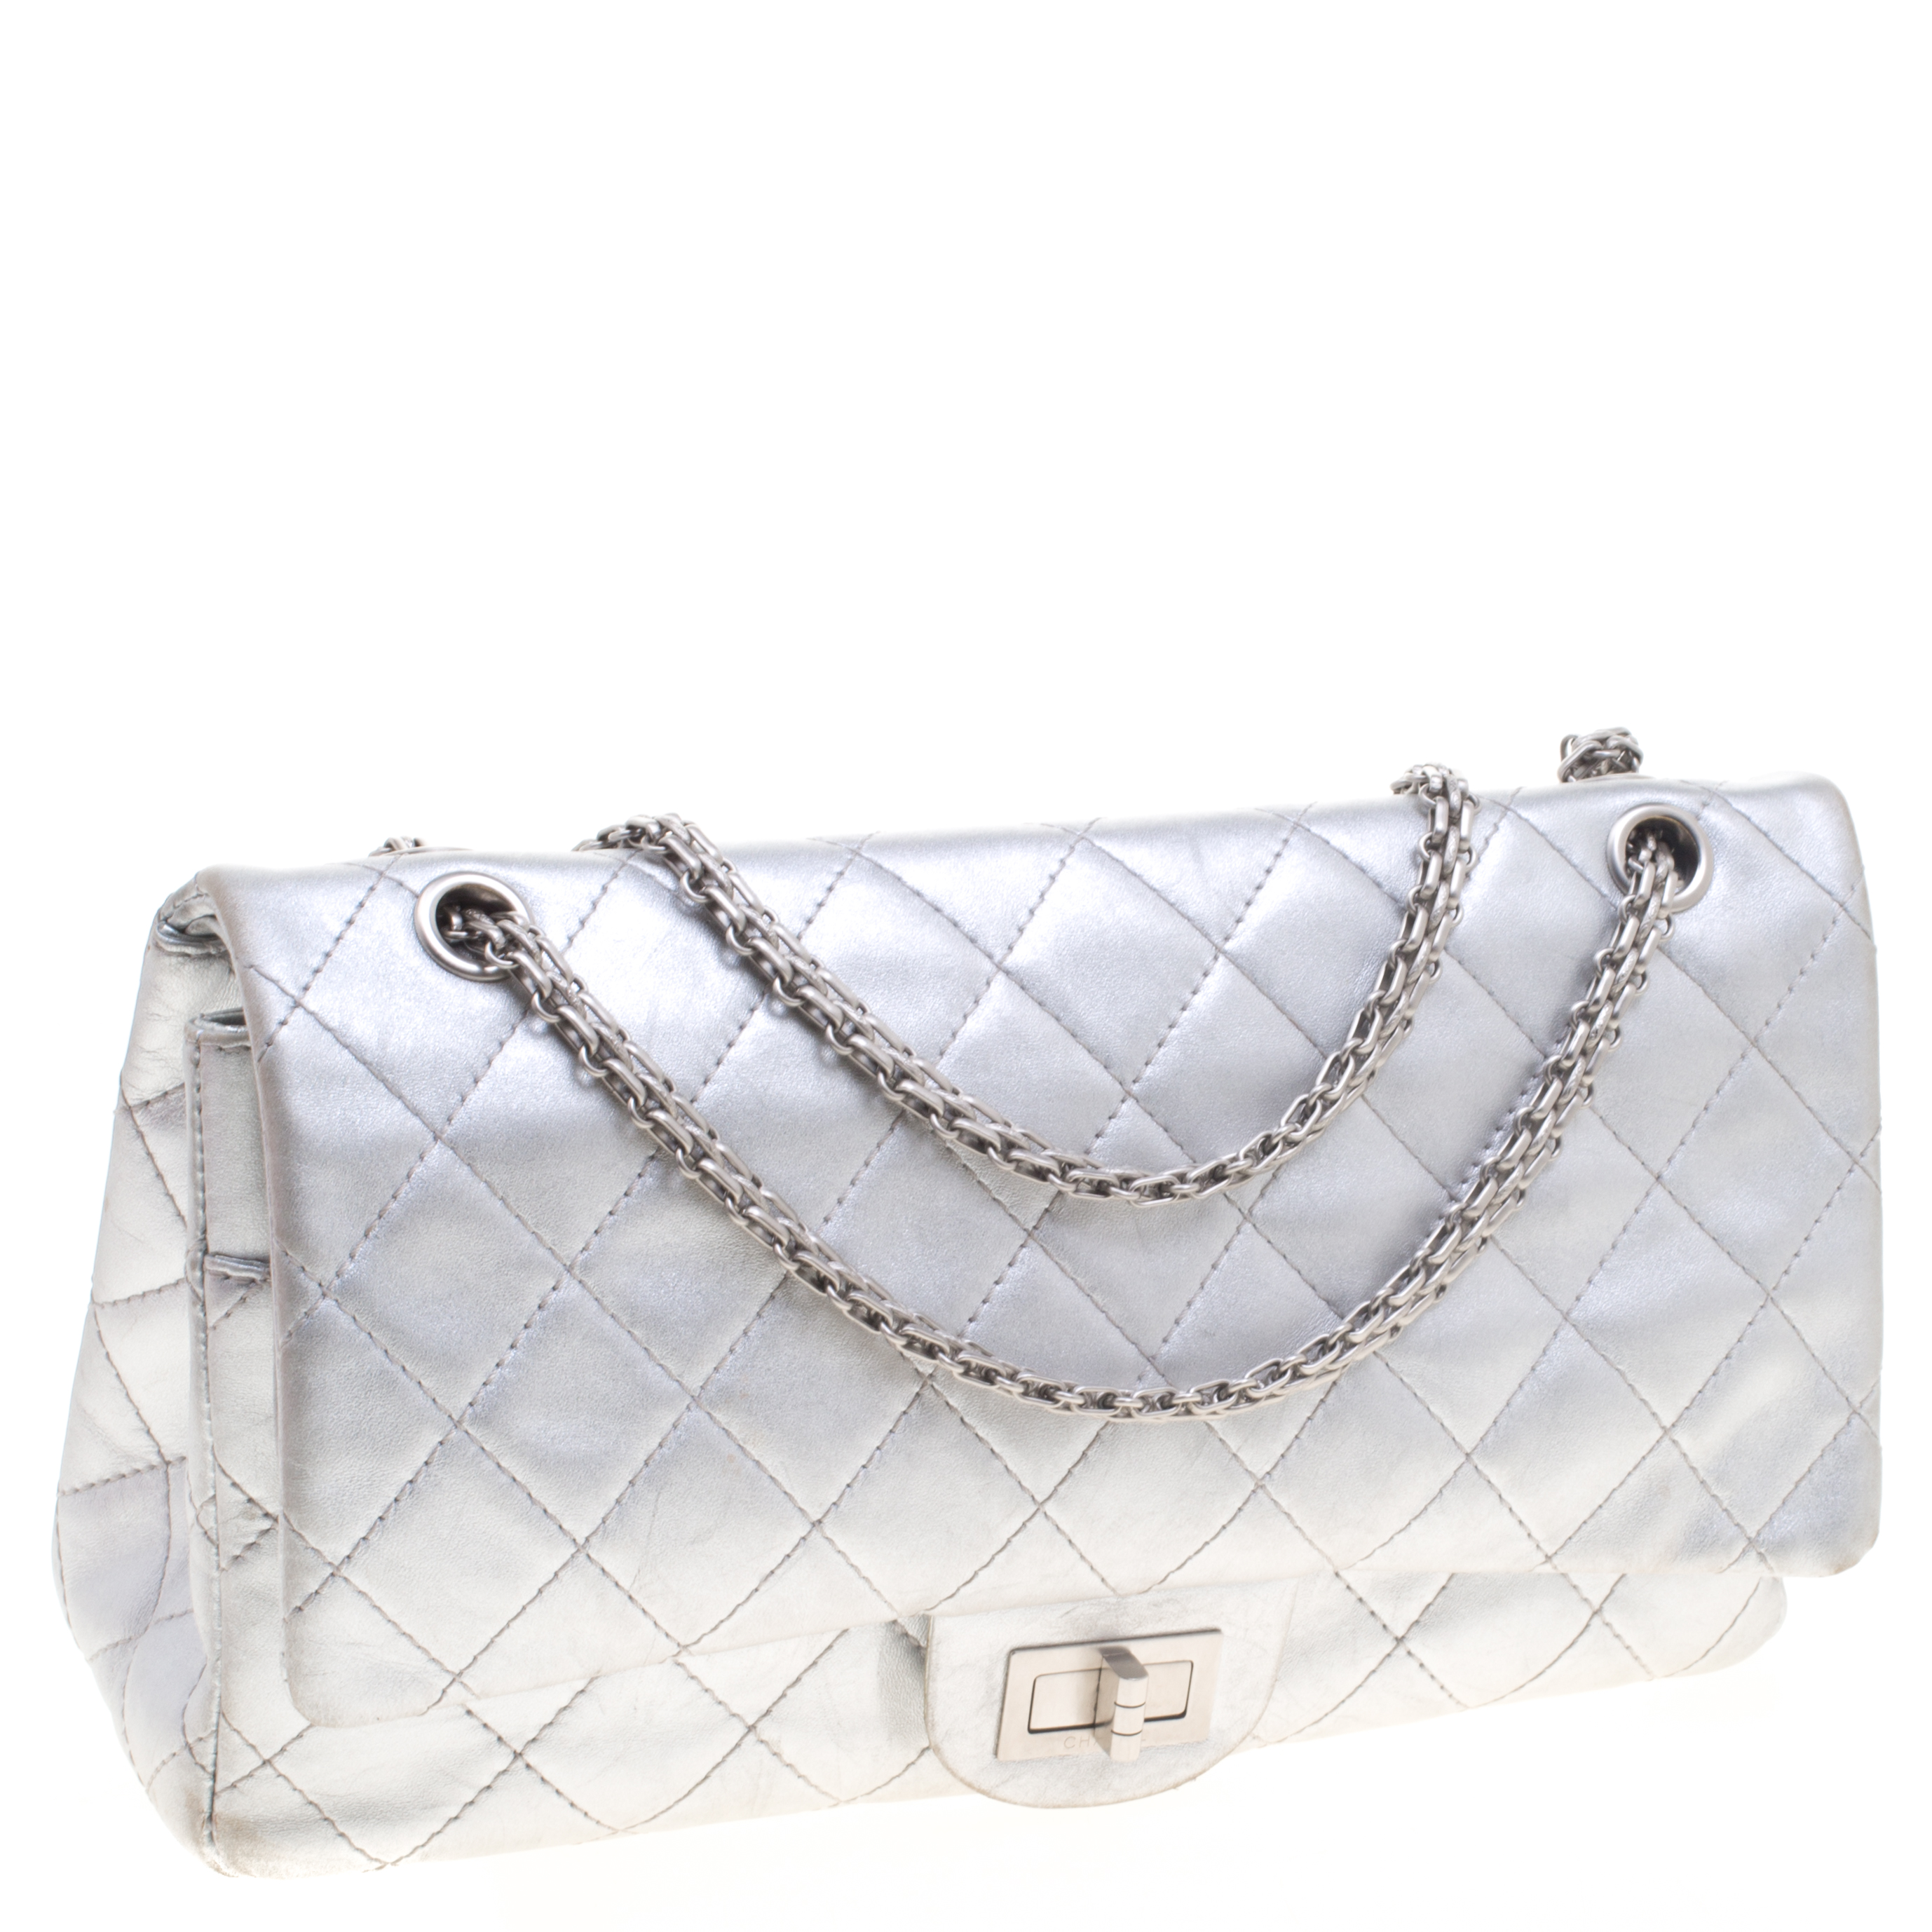 Chanel Silver Quilted Leather 2.55 Reissue Flap Bag Chanel | TLC